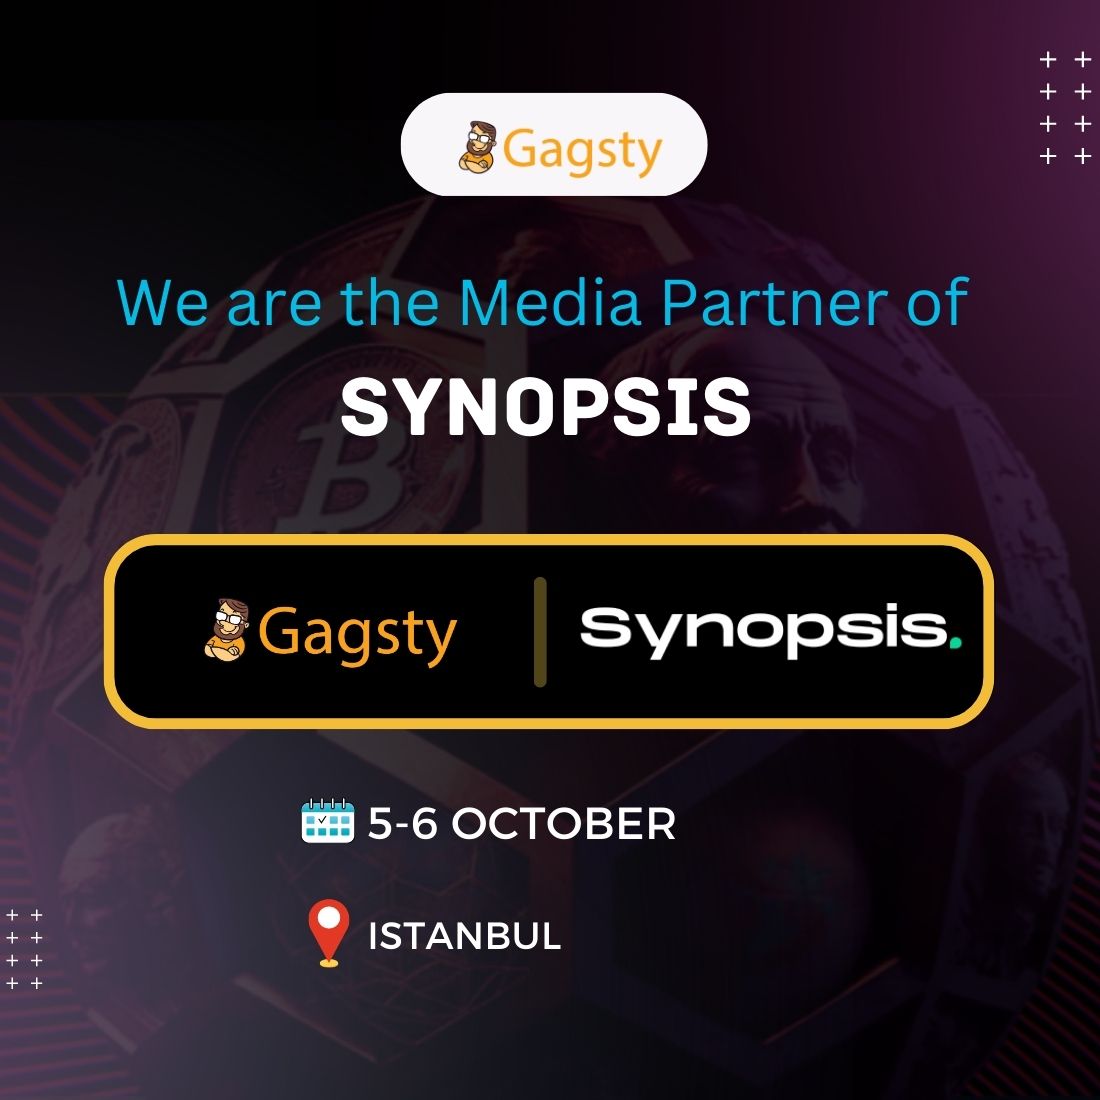 We are delighted to be the Media Partner of Synopsis.

@SynopsisEvents

Join the summit: synopsis.events

#Gagsty #MediaPartner #mediapartnership #Synopsis #web3 #internationalsummit #blockchain #metaverse #GameFi #NFT #cryptography